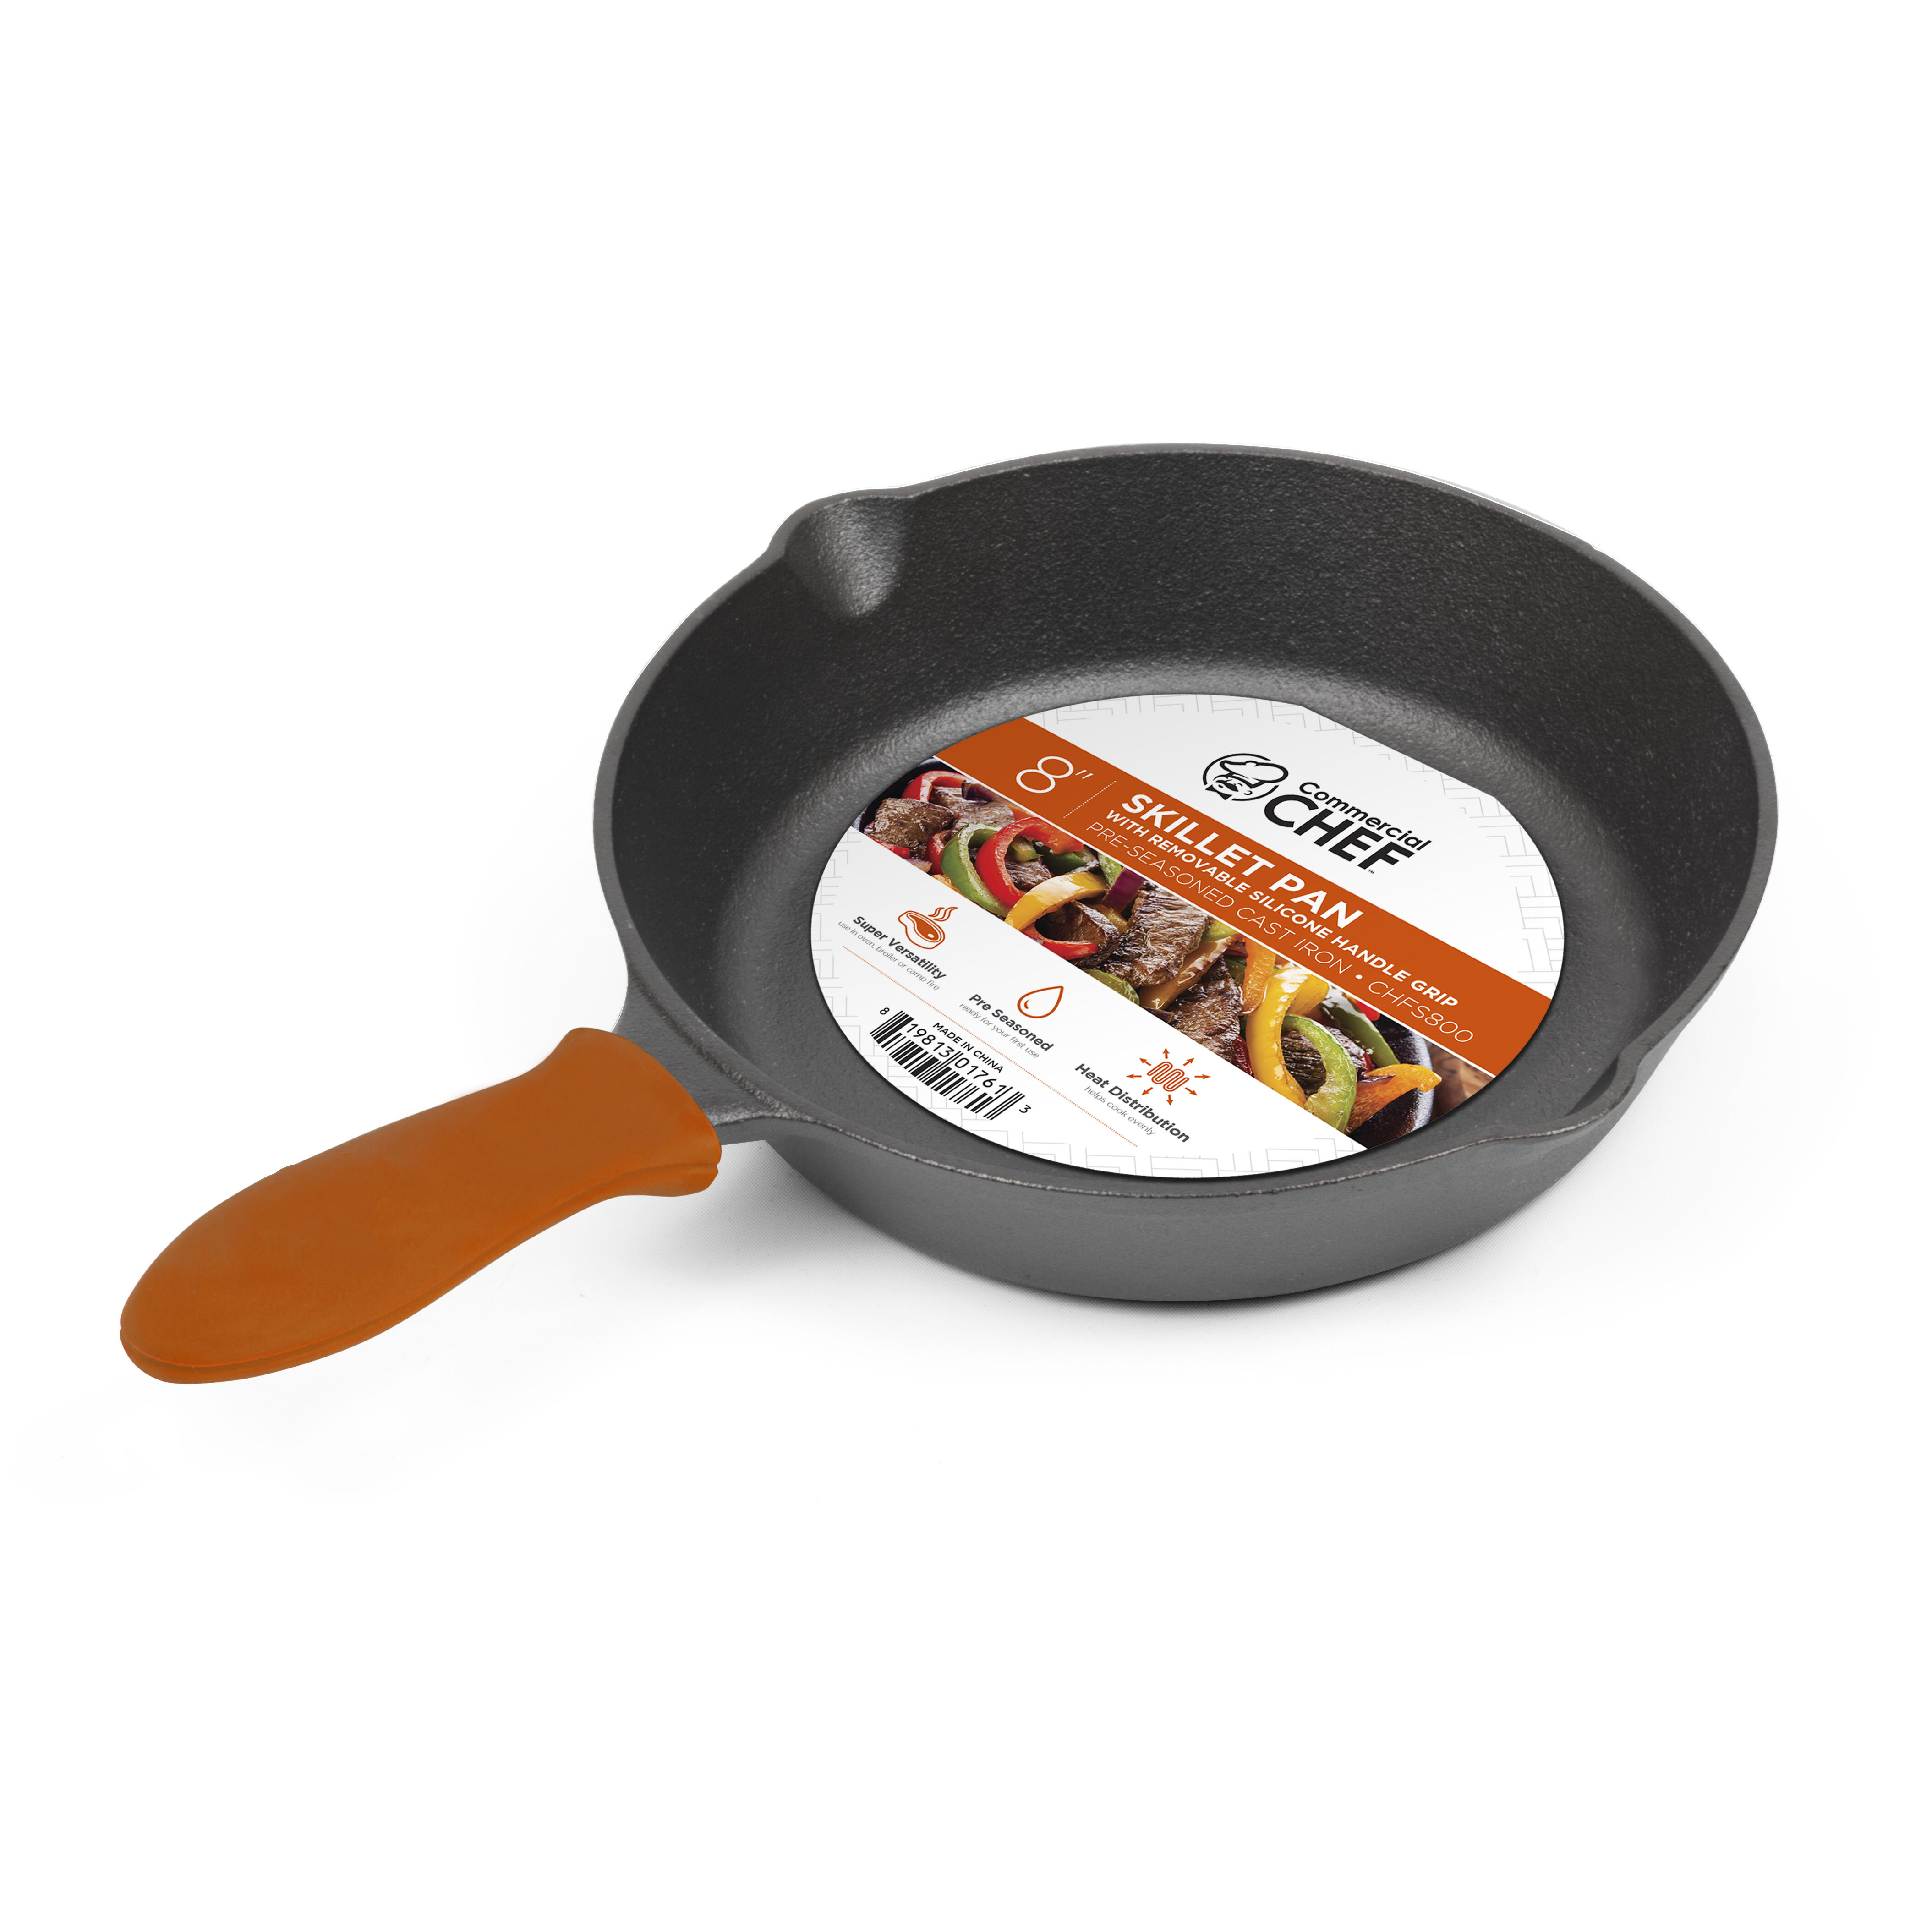 Nutrichef 12'' Pre-Seasoned Cast Iron Pan - Fry Pan with Glass Lid & Silicone Handle